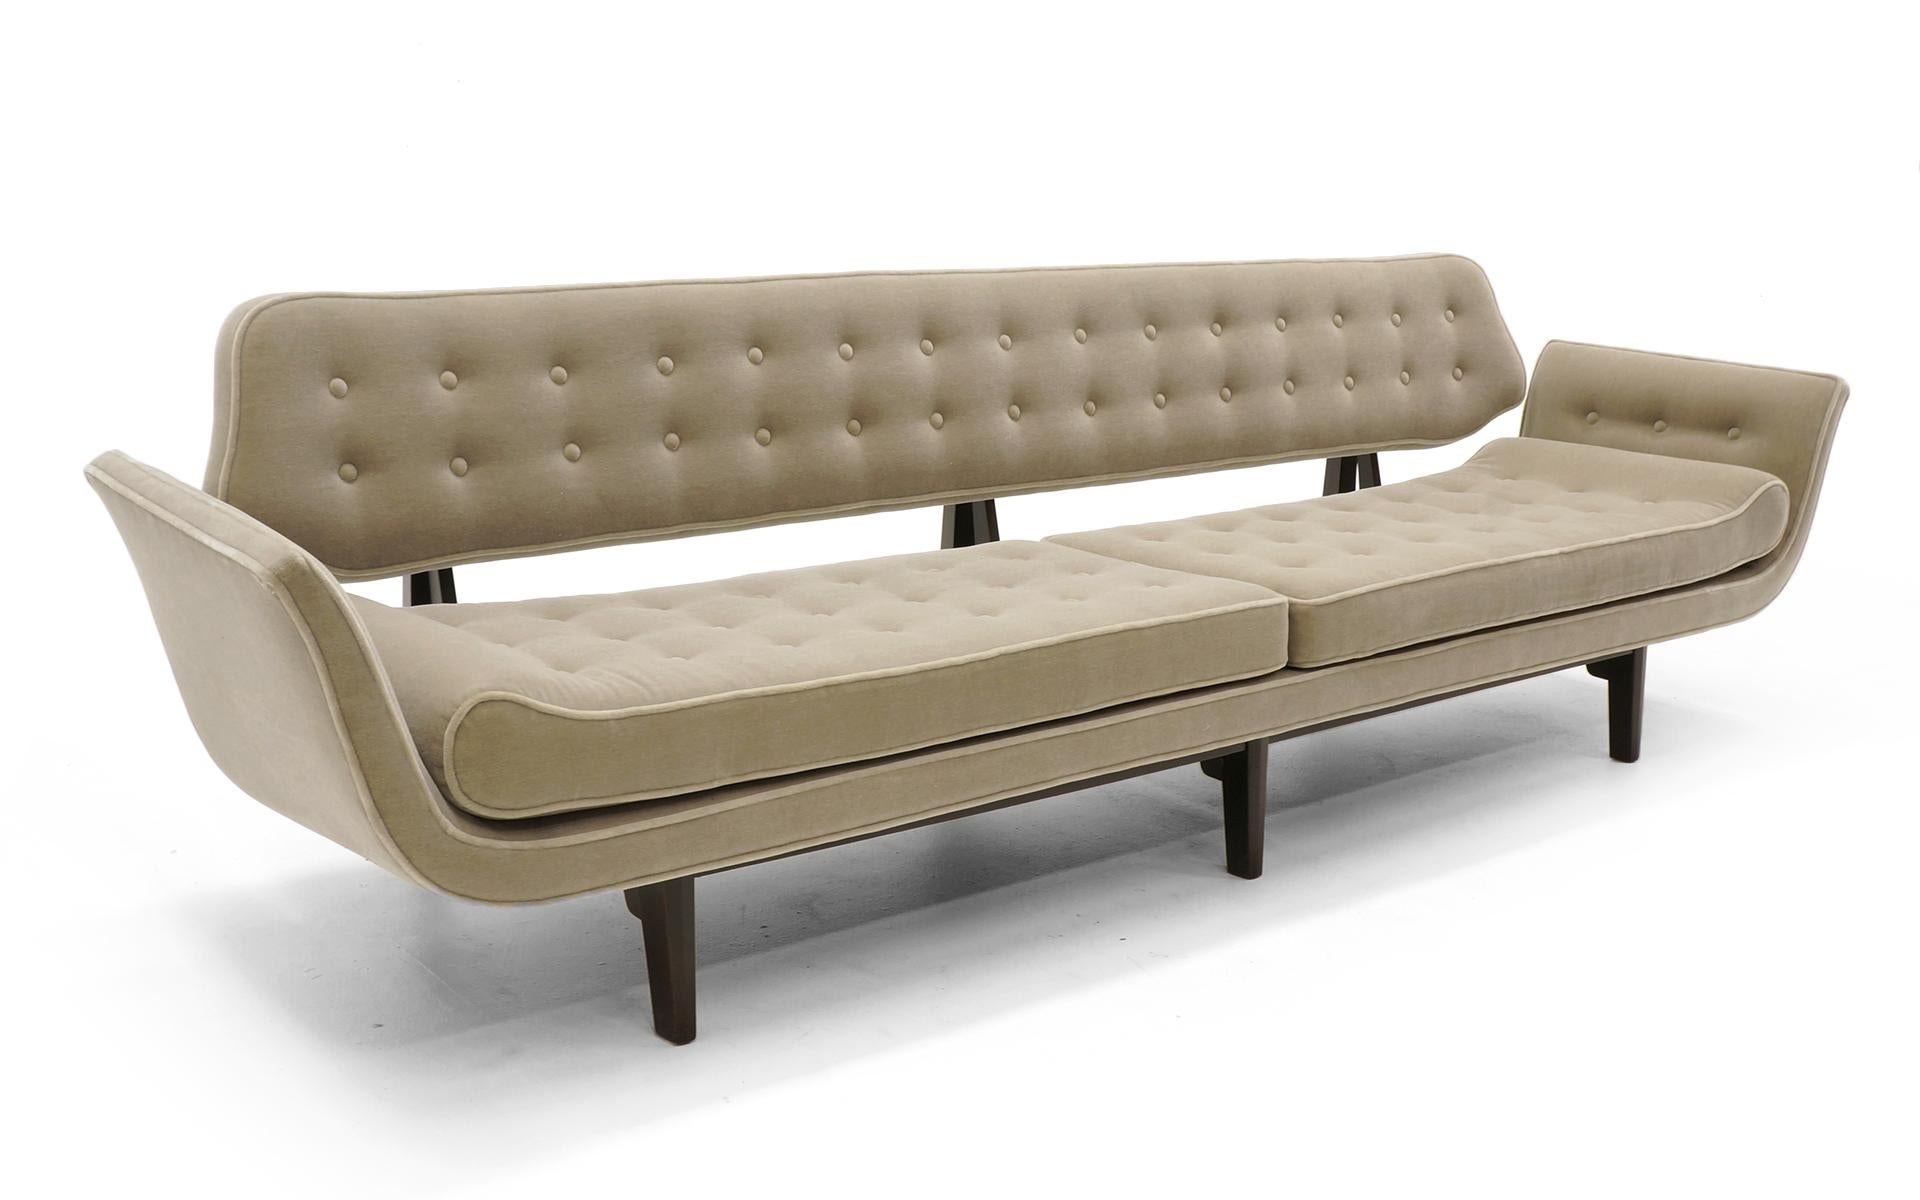 Edward Wormley's famous La Gondola sofa. One of the best sofa designs of the entire modern design movement. Expertly refinished and reupholstered in a light to medium grey mohair. Plush and elegant.